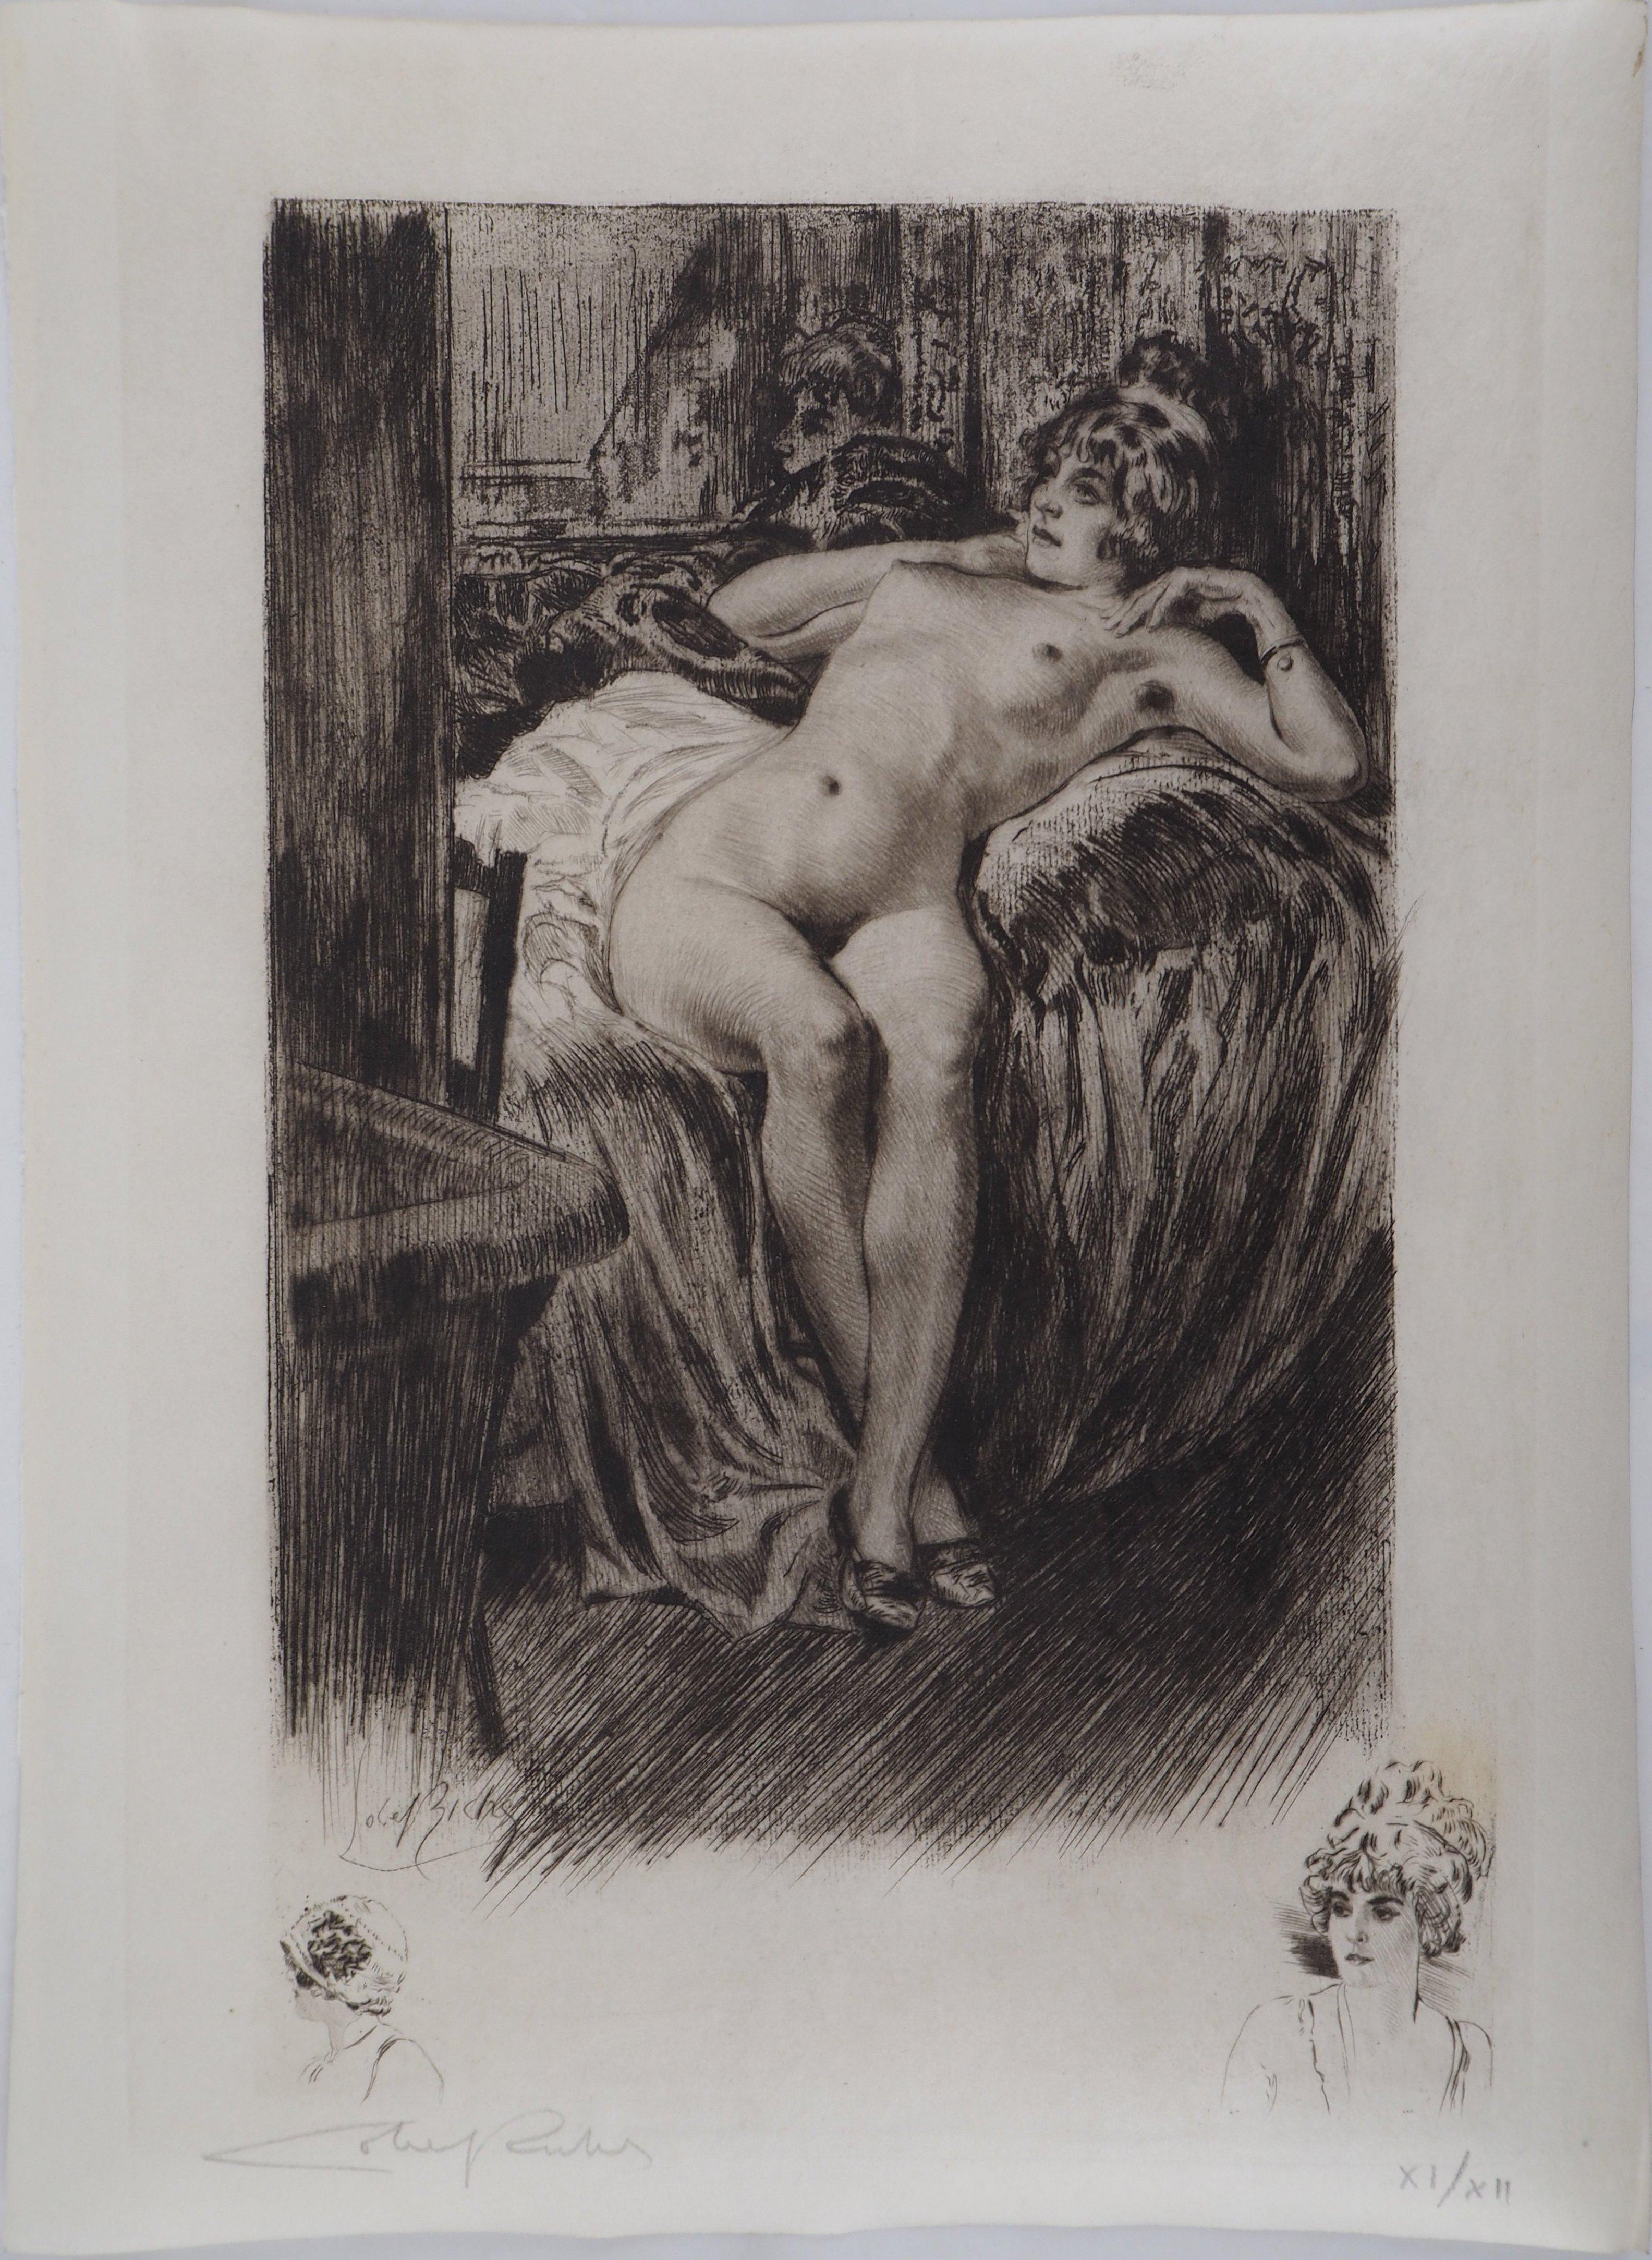 Lying Nude on a bed - Original Etching Handsigned  - Modern Print by Almery Lobel-Riche